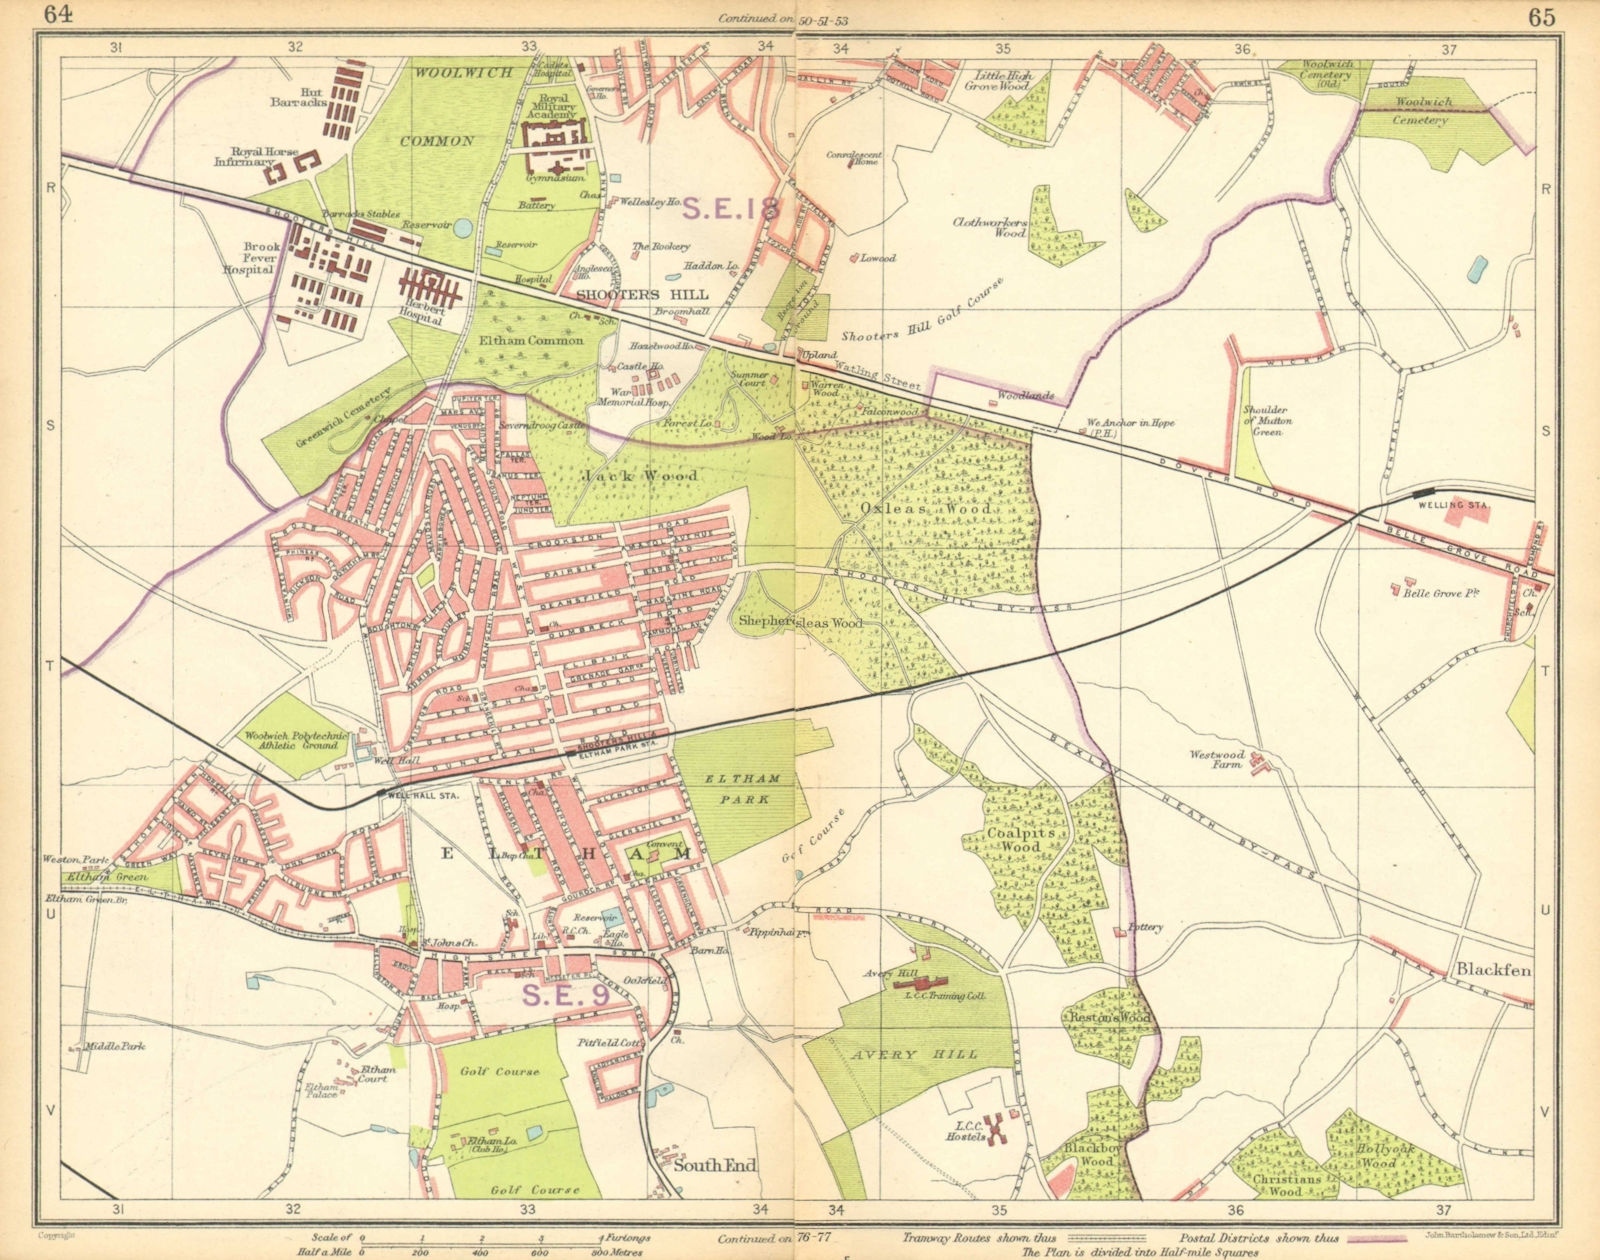 LONDON SE. Eltham Shooters Hill South End Welling Blackfen Avery Hill 1925 map